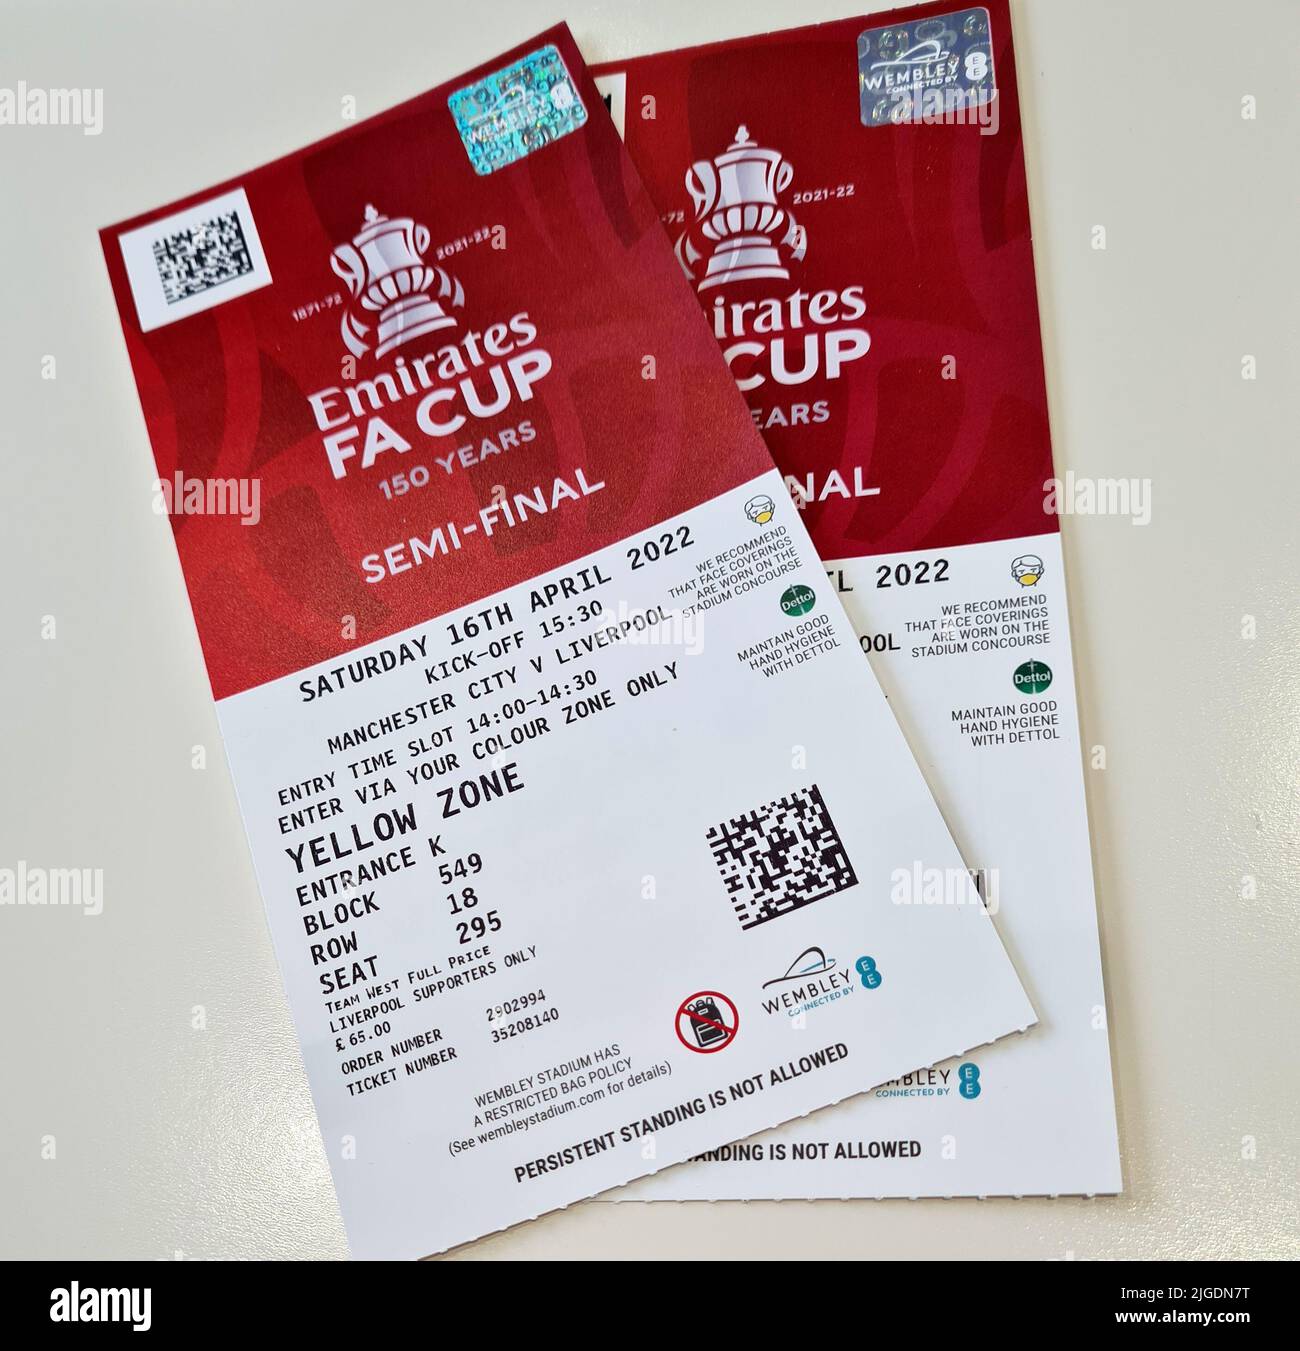 paper fa cup semi final tickets for the match in 2022 between manchester city and liverpool Stock Photo